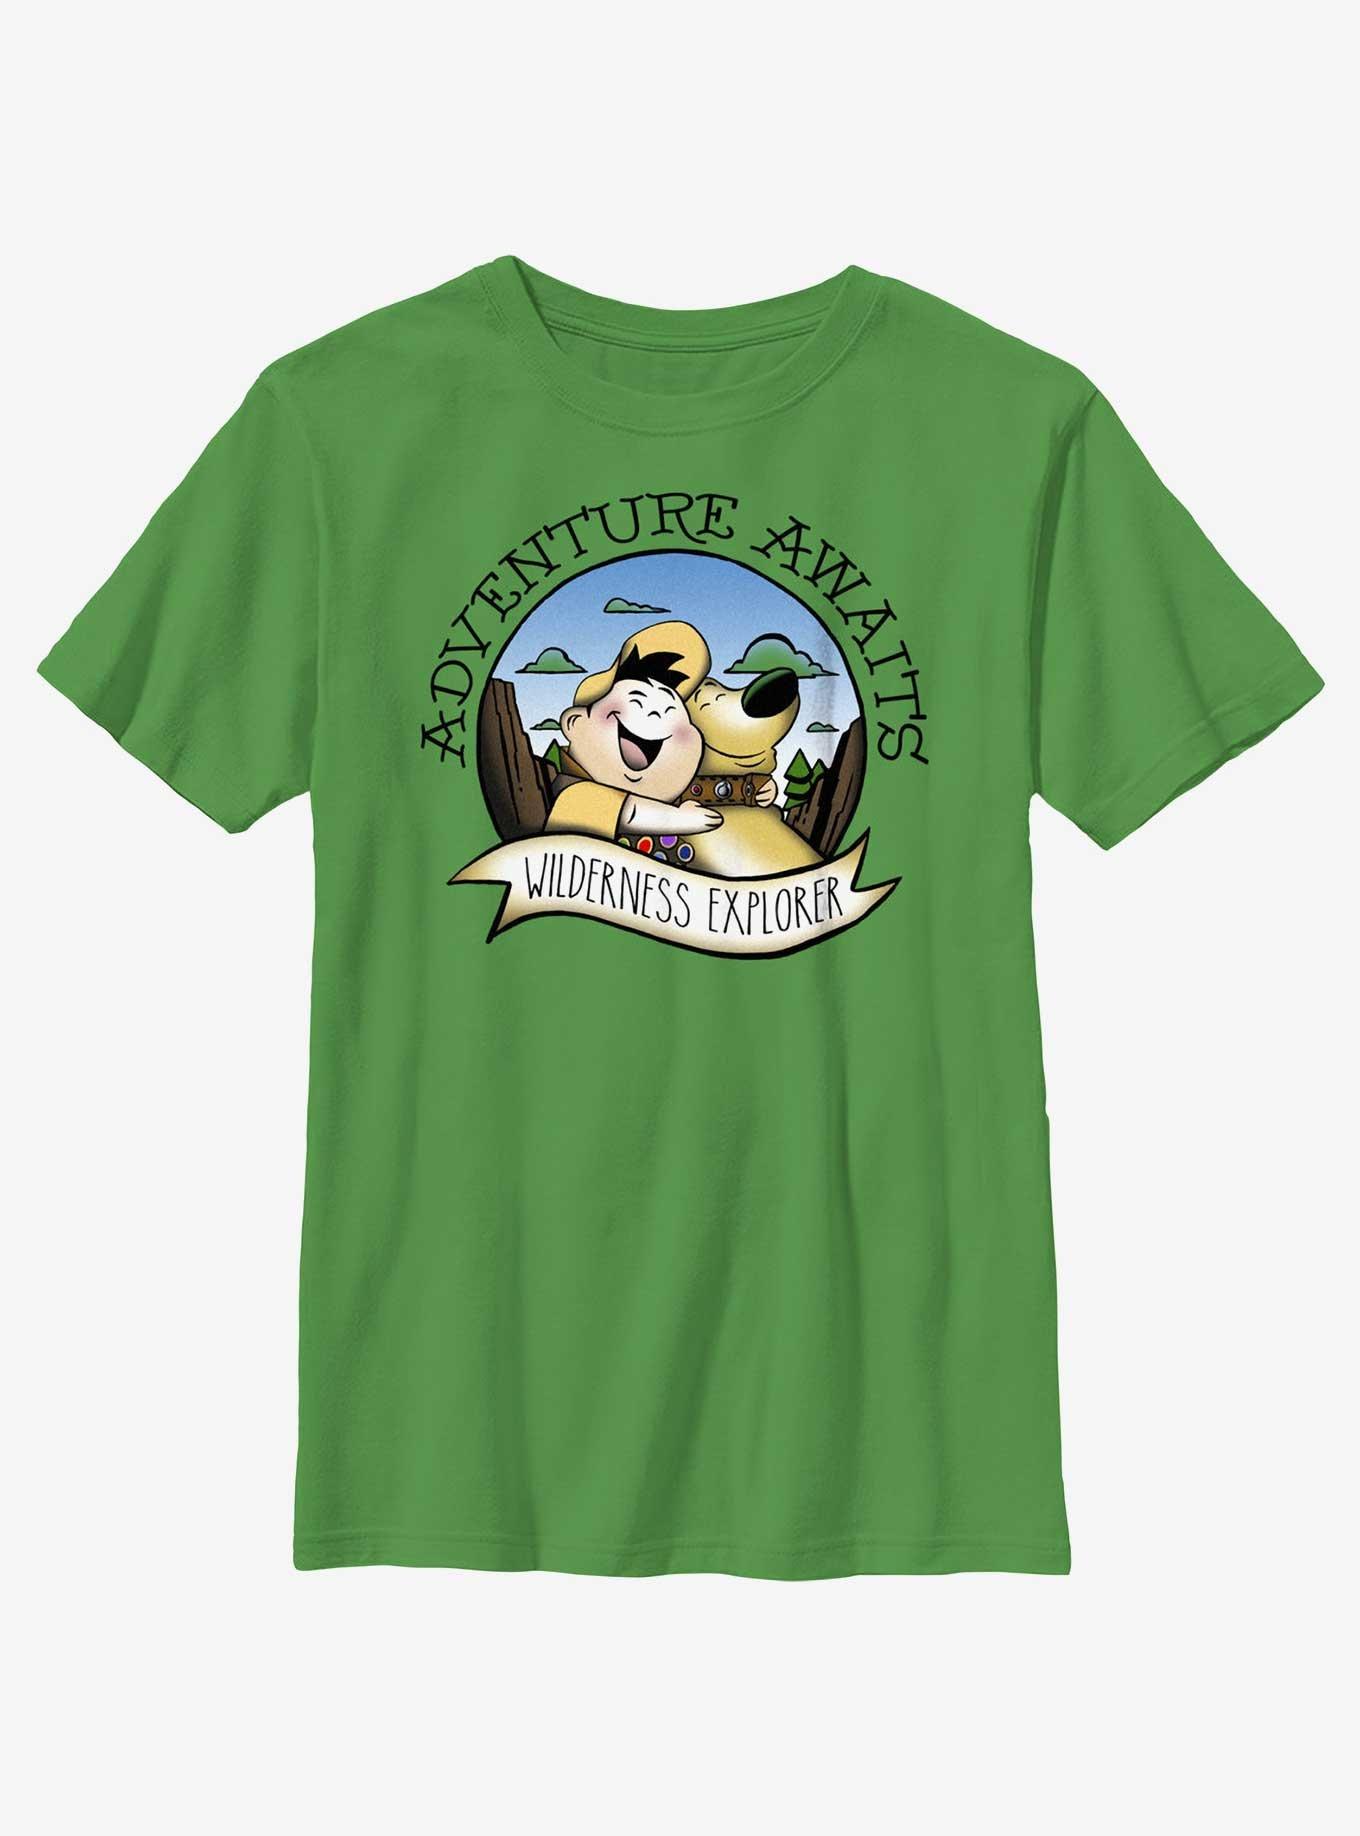 Disney Pixar Up Russell and Dug Wilderness Explorer Youth T-Shirt, KELLY, hi-res